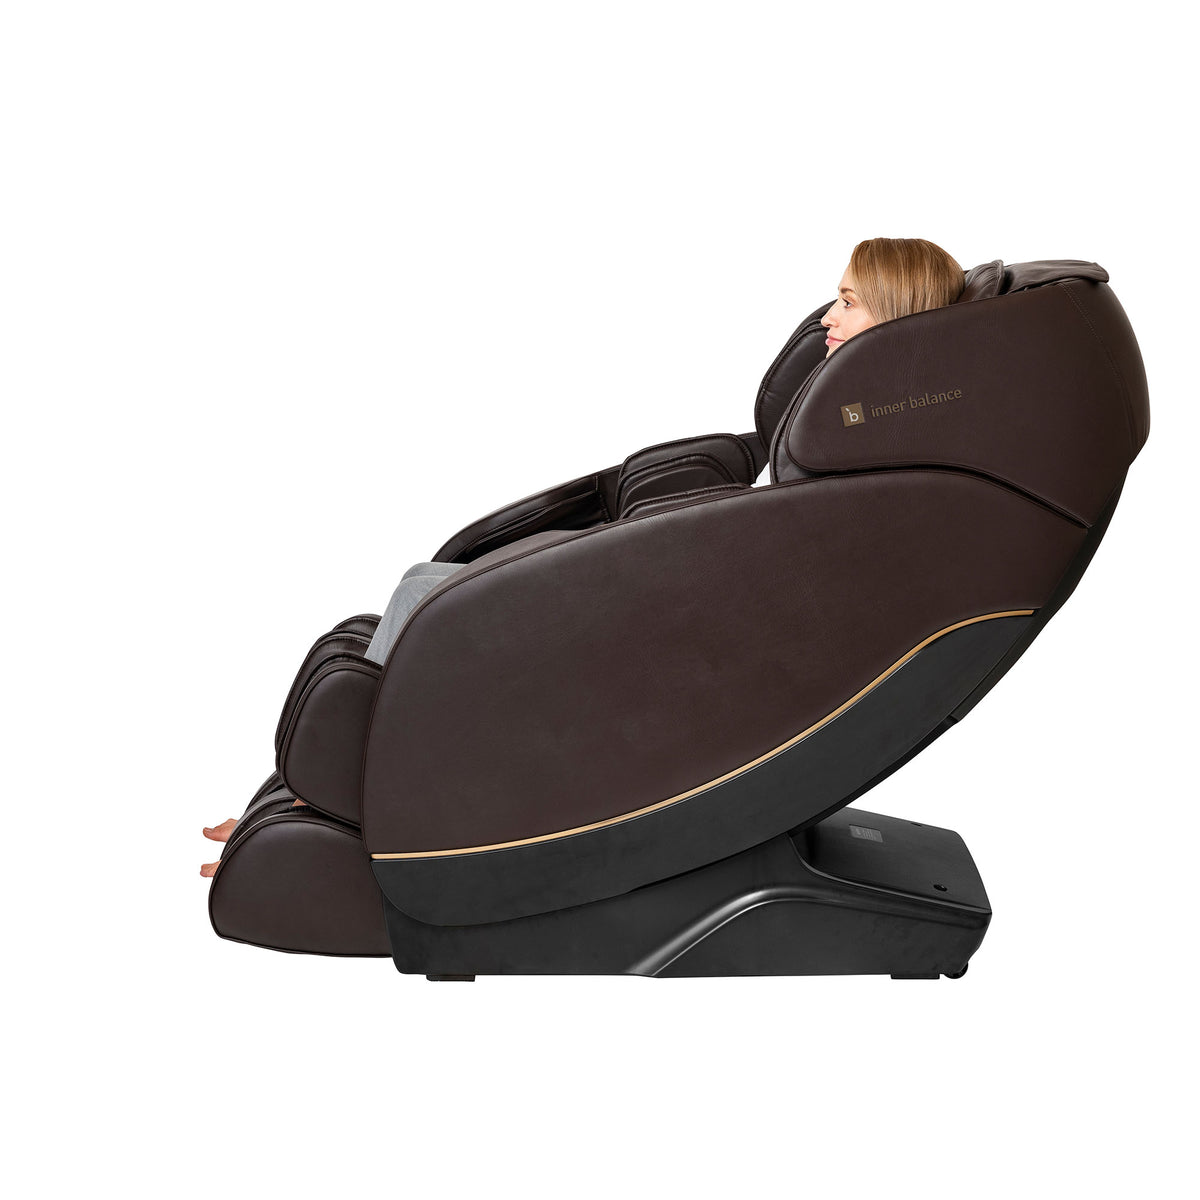 Side view of a woman sitting up-right in the Inner Balance Wellness Jin 2.0 Massage Chair in brown leather with gold trimming